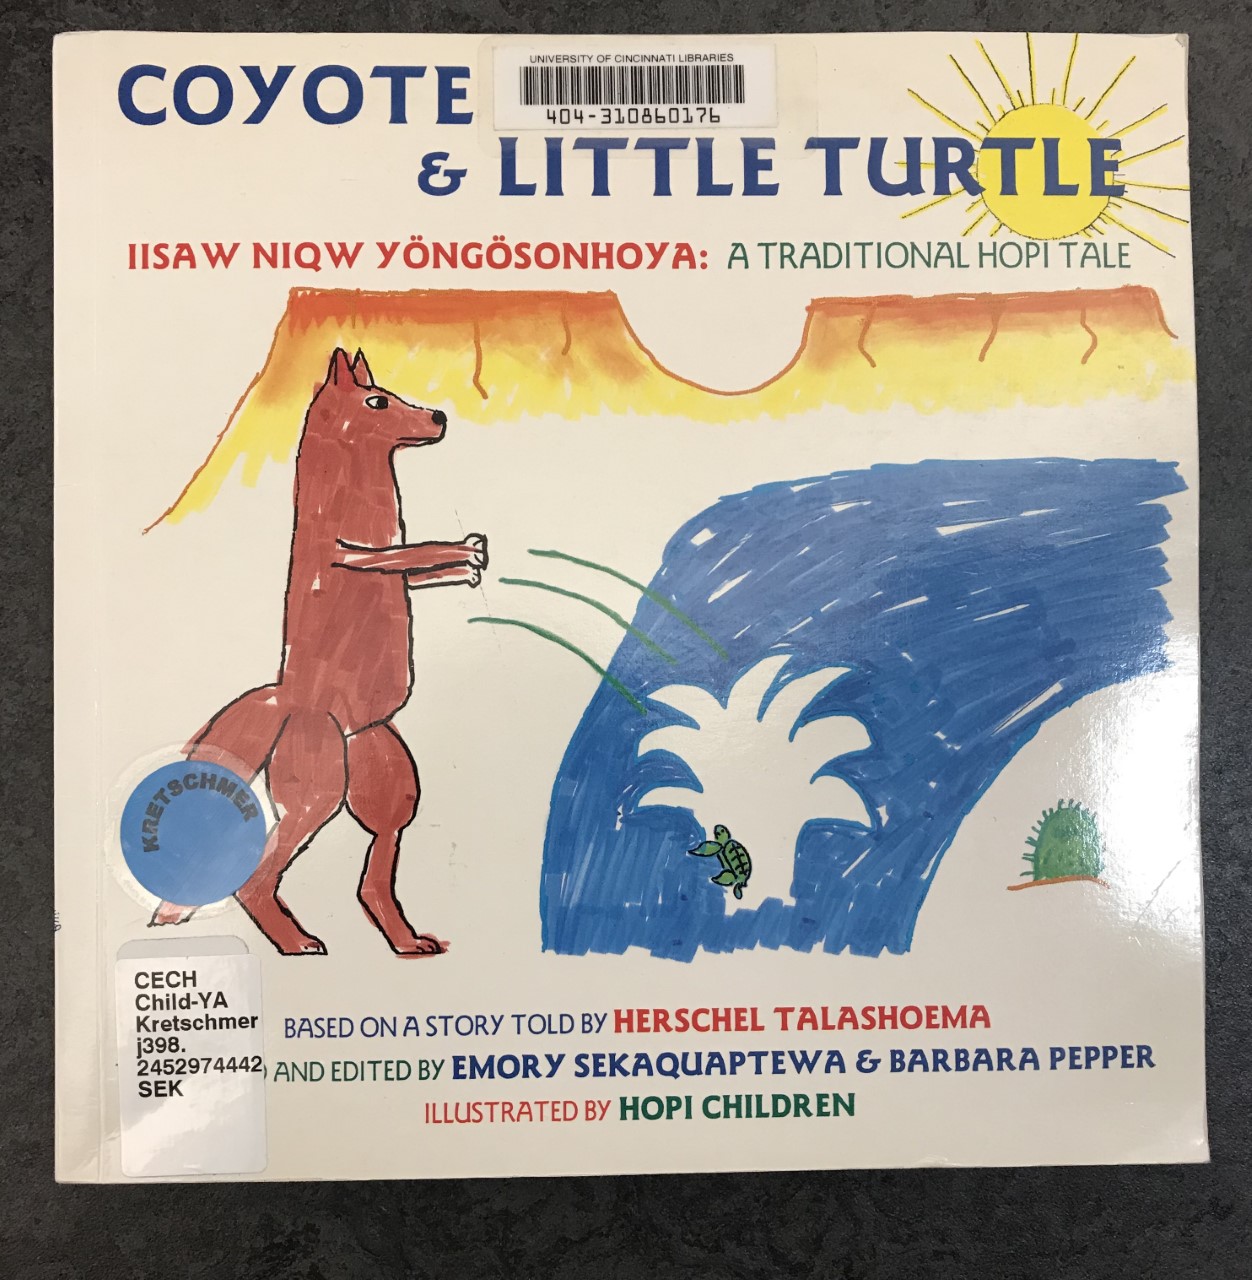 Image of the book Coyote and Little Turtle